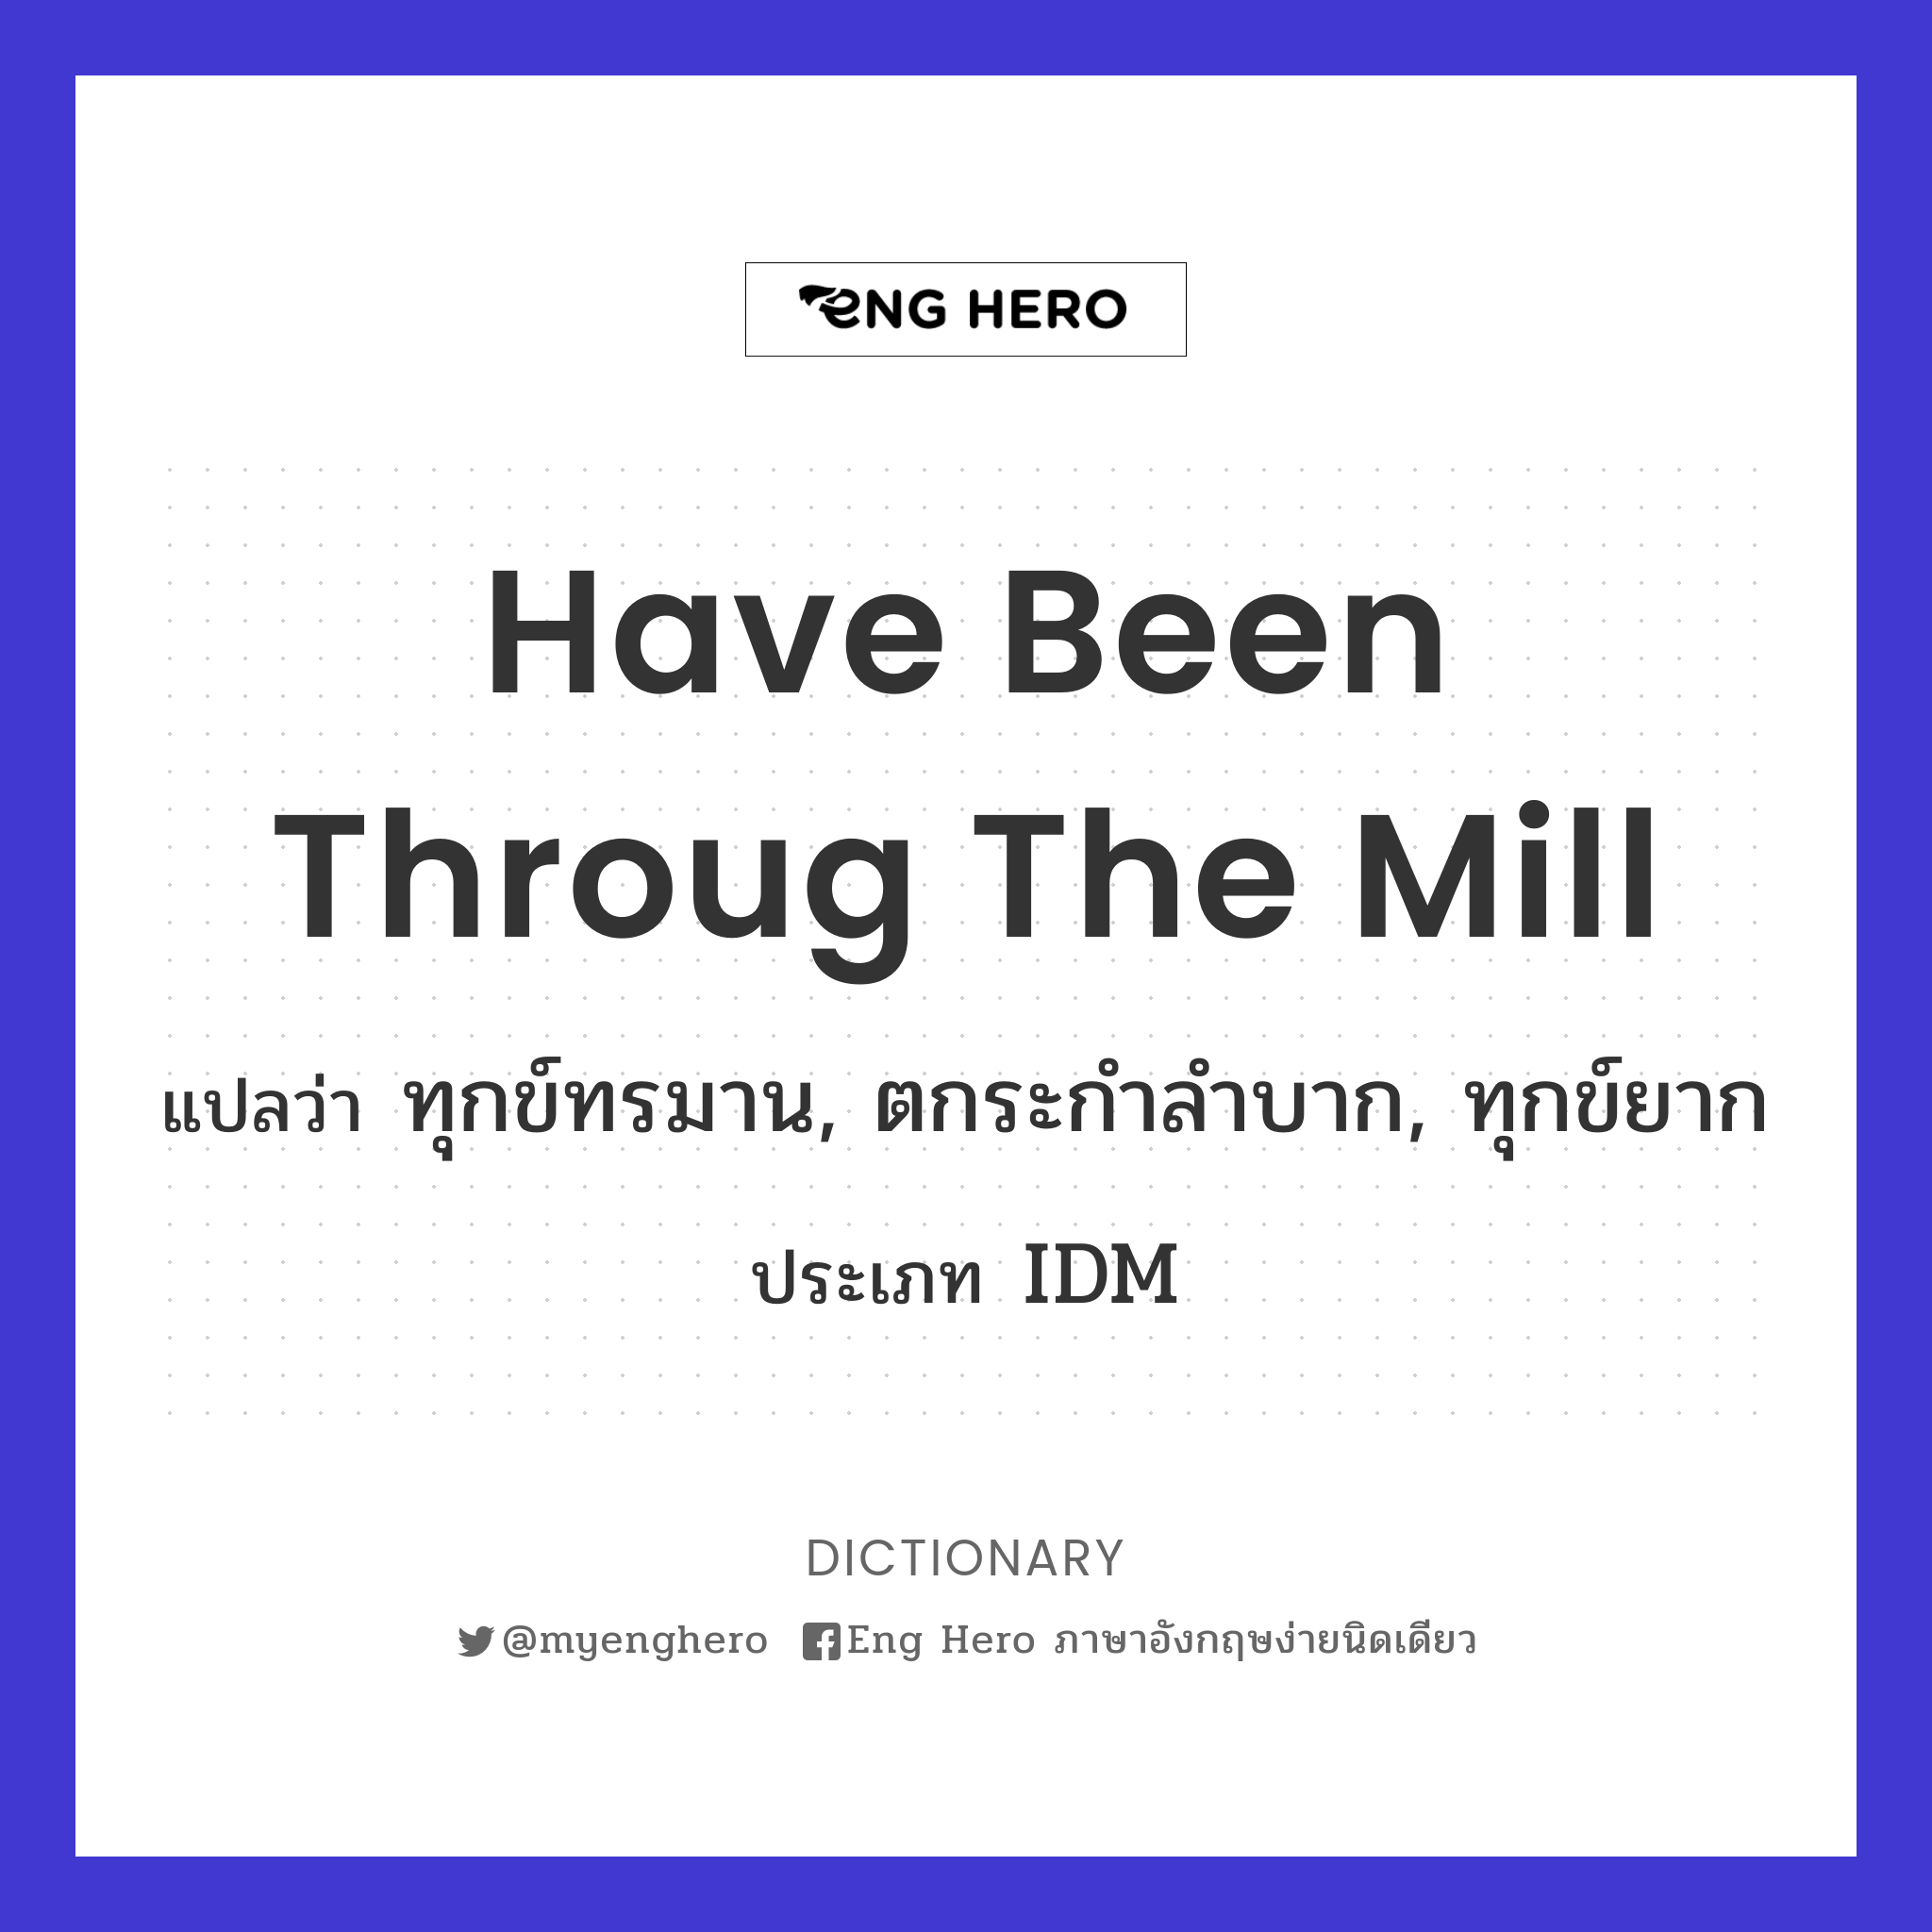 have been throug the mill